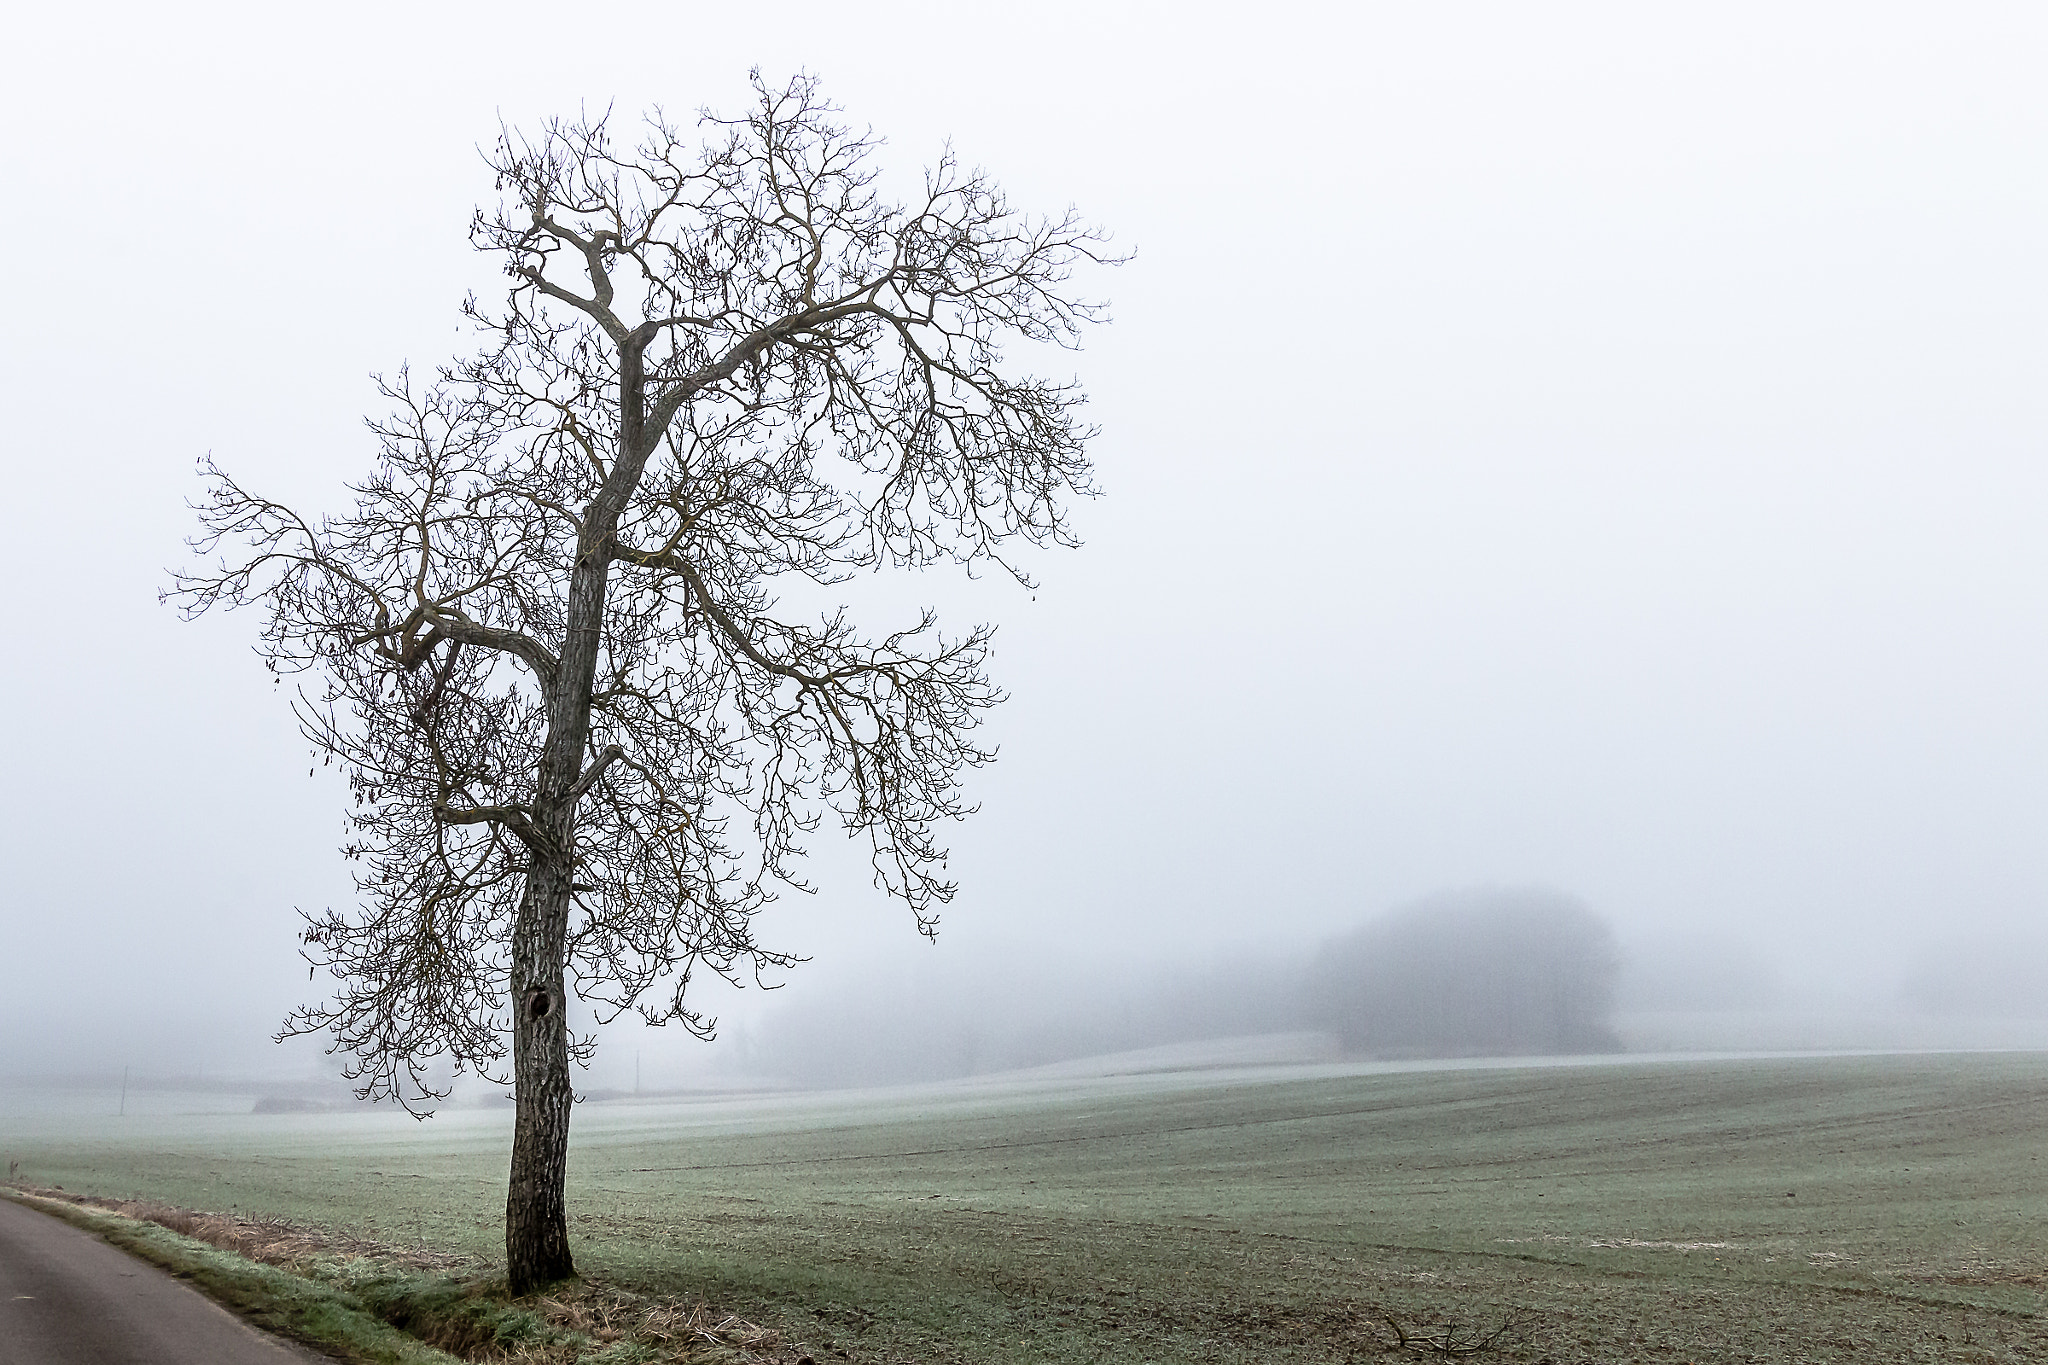 Canon EOS 70D + Sigma 24-105mm f/4 DG OS HSM | A sample photo. Alone in the mist photography